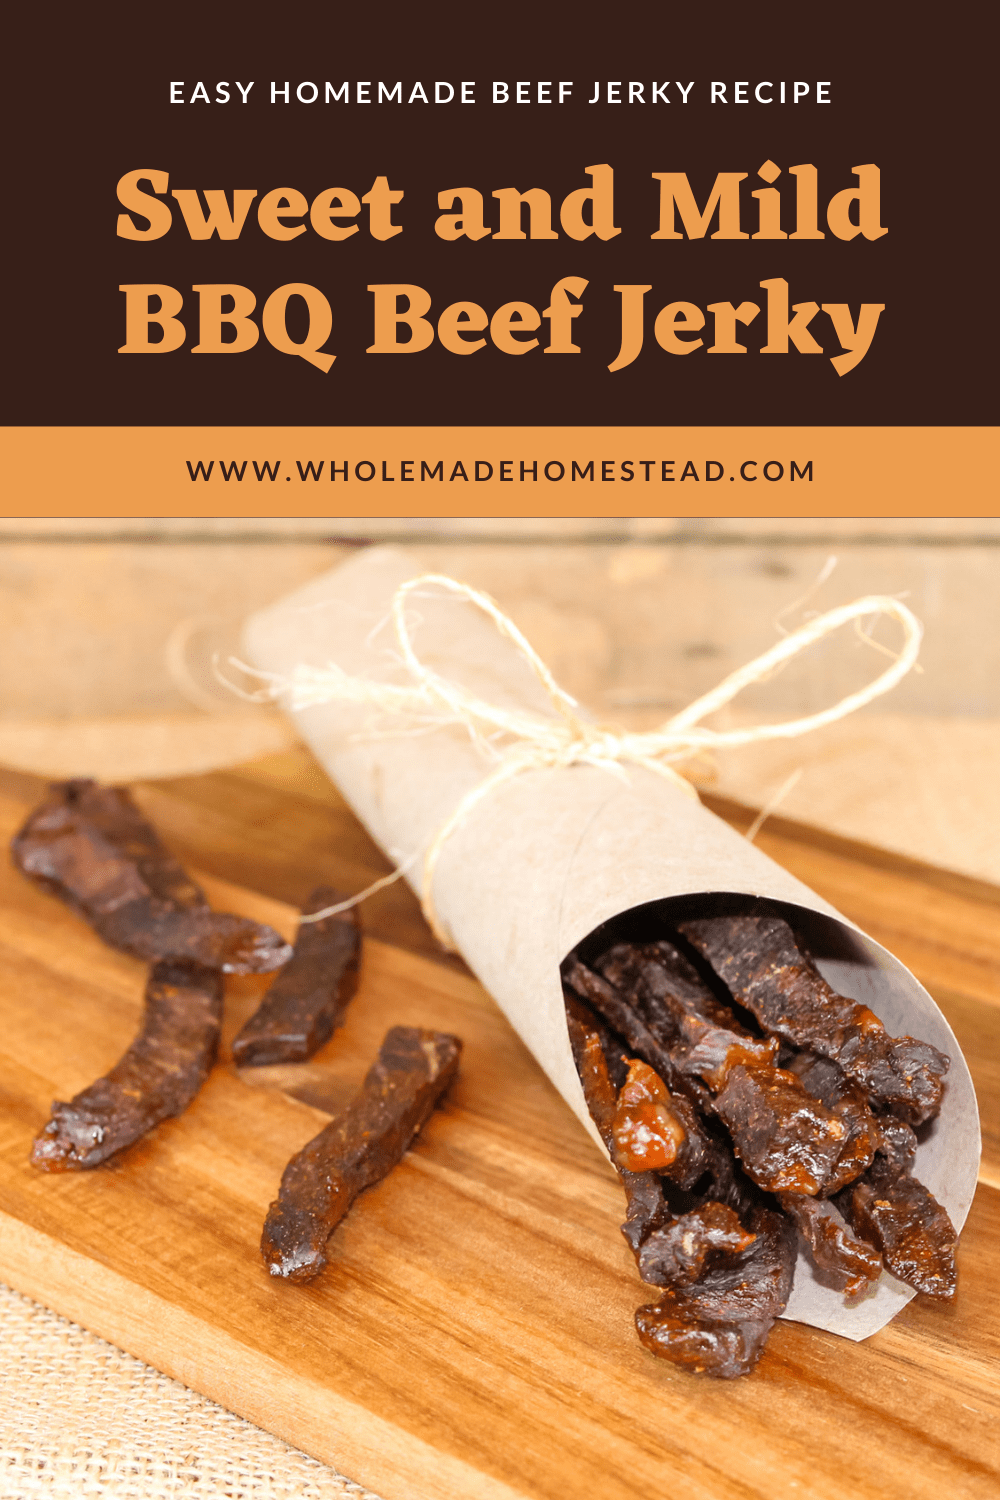 Sweet and Tangy BBQ Beef Jerky - Grain Free Table